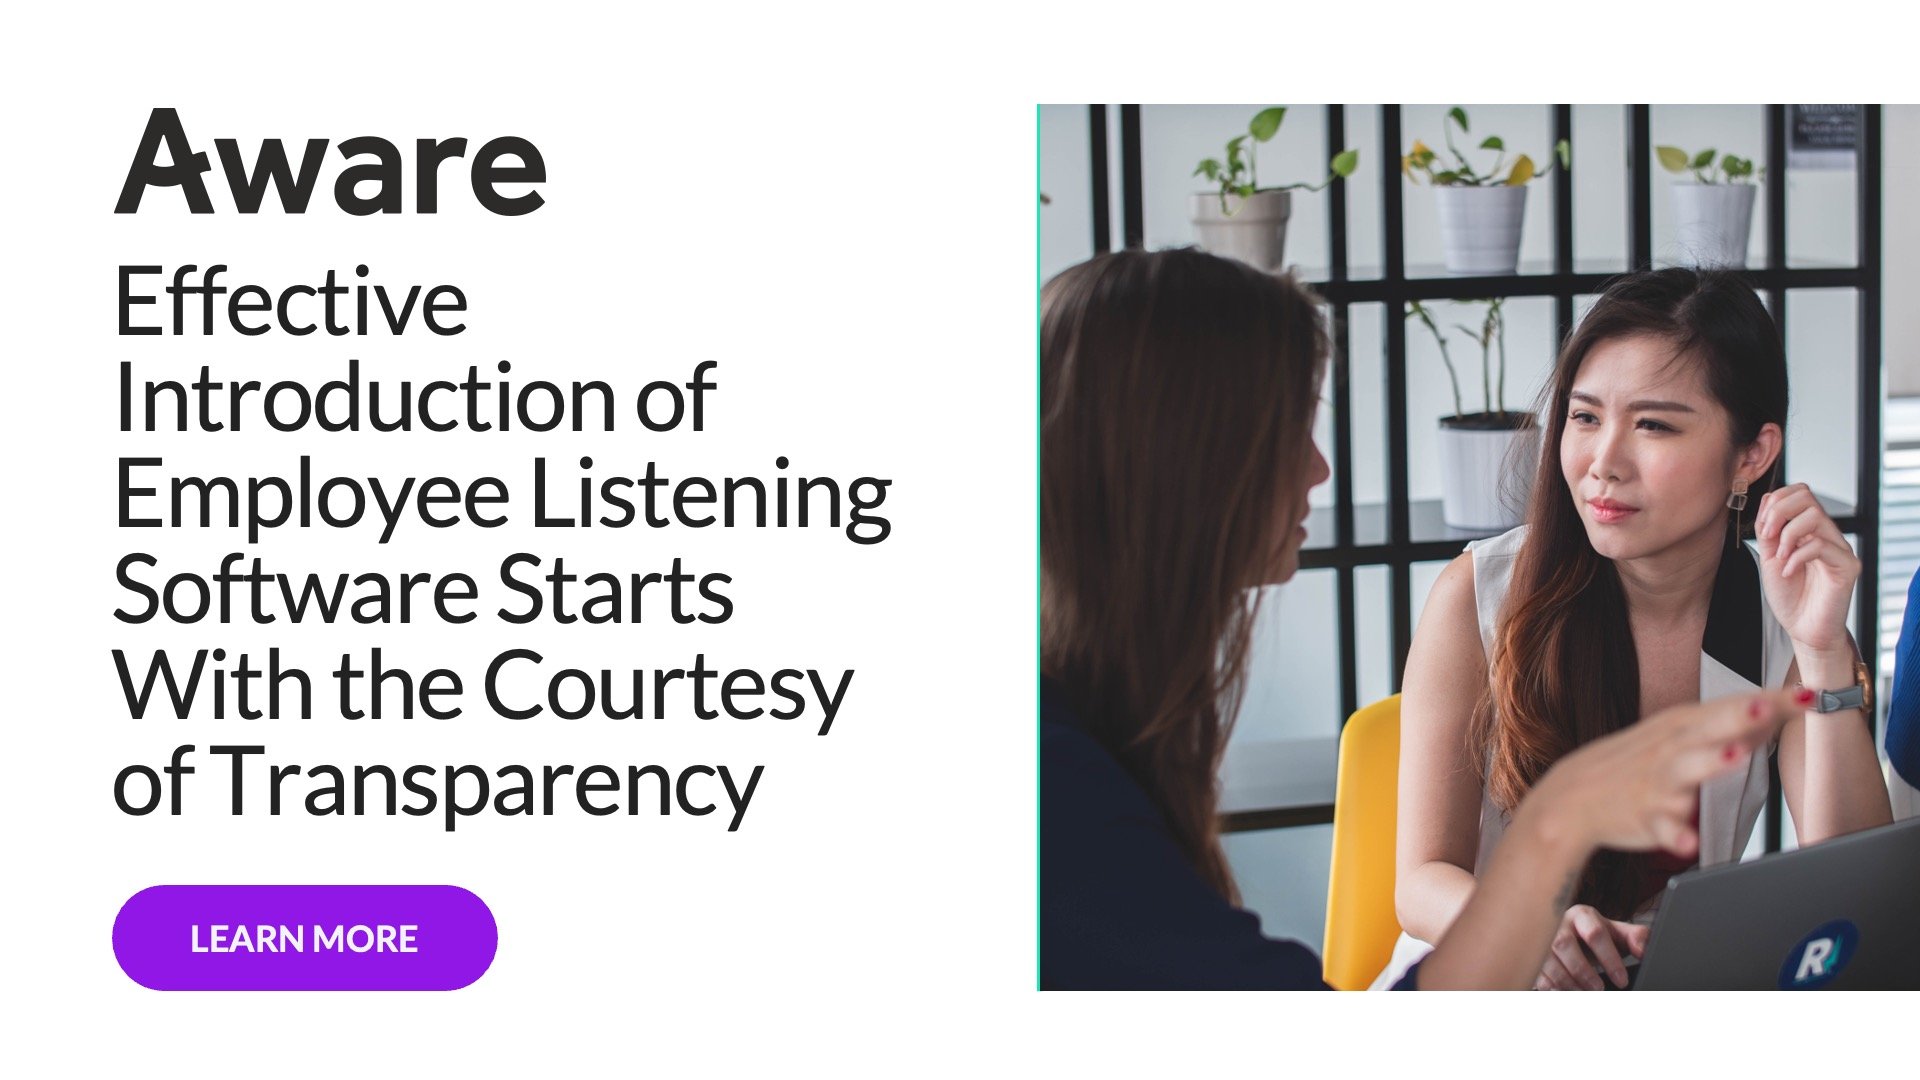 Effective Introduction of Employee Listening Software Starts With the Courtesy of Transparency